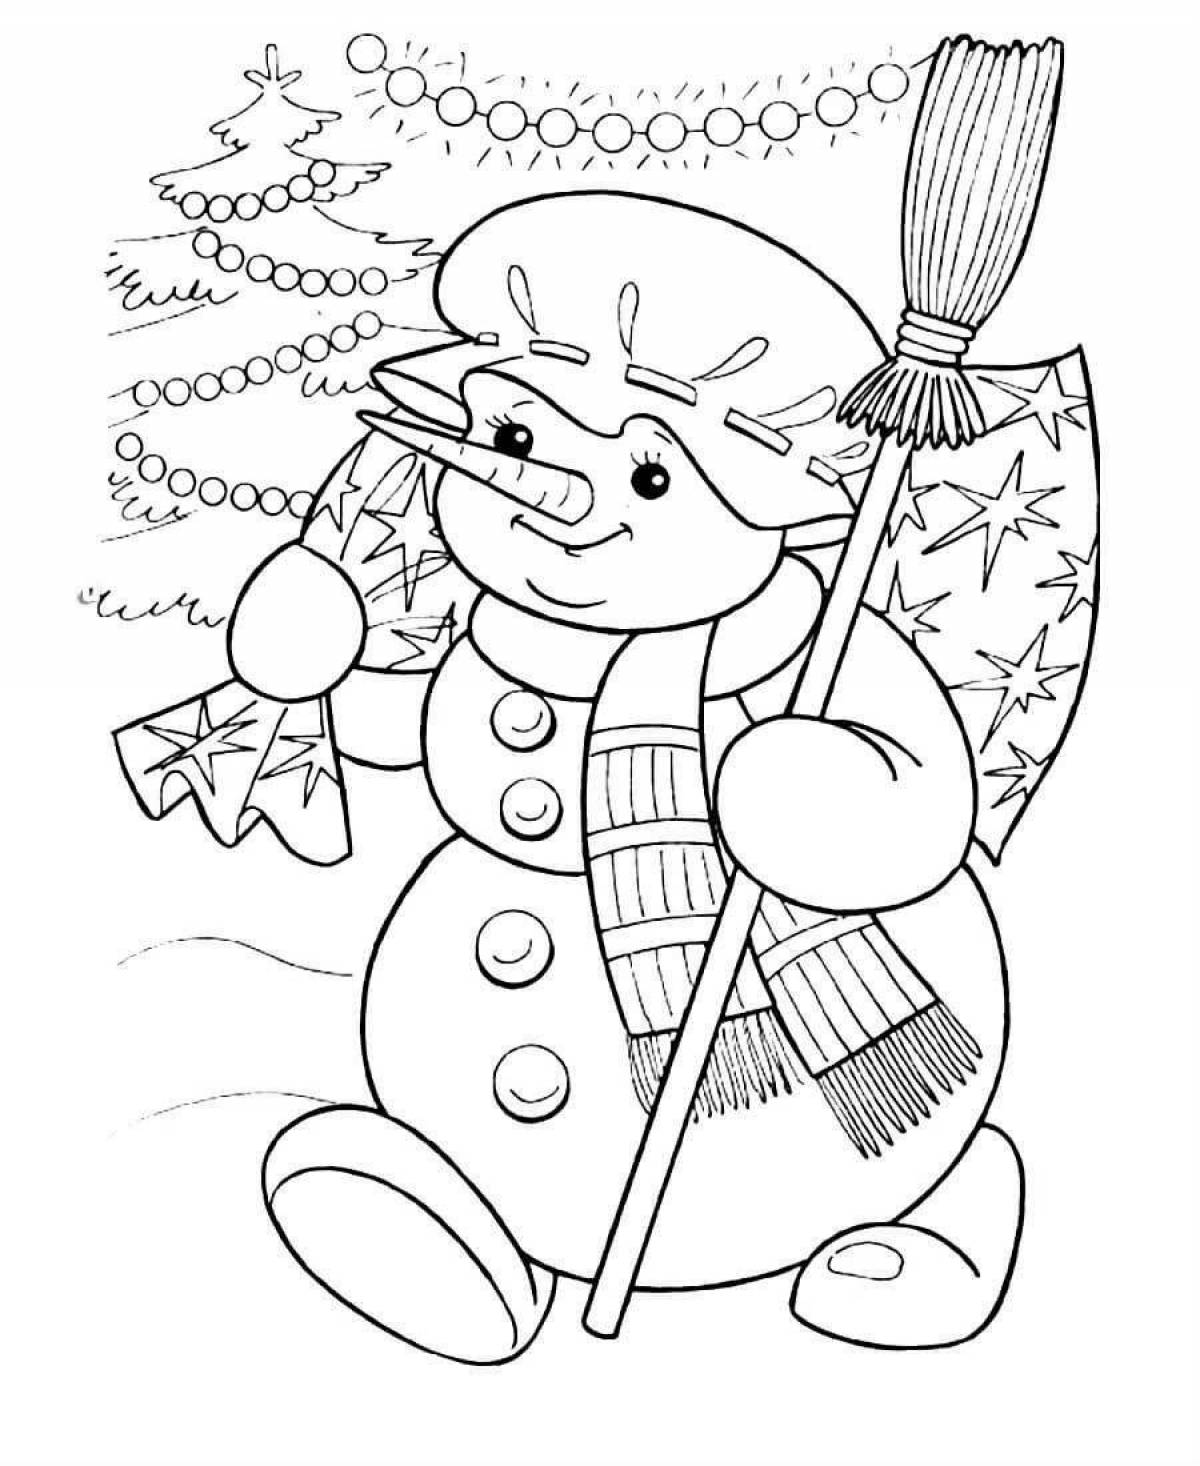 Glorious snowmen coloring page